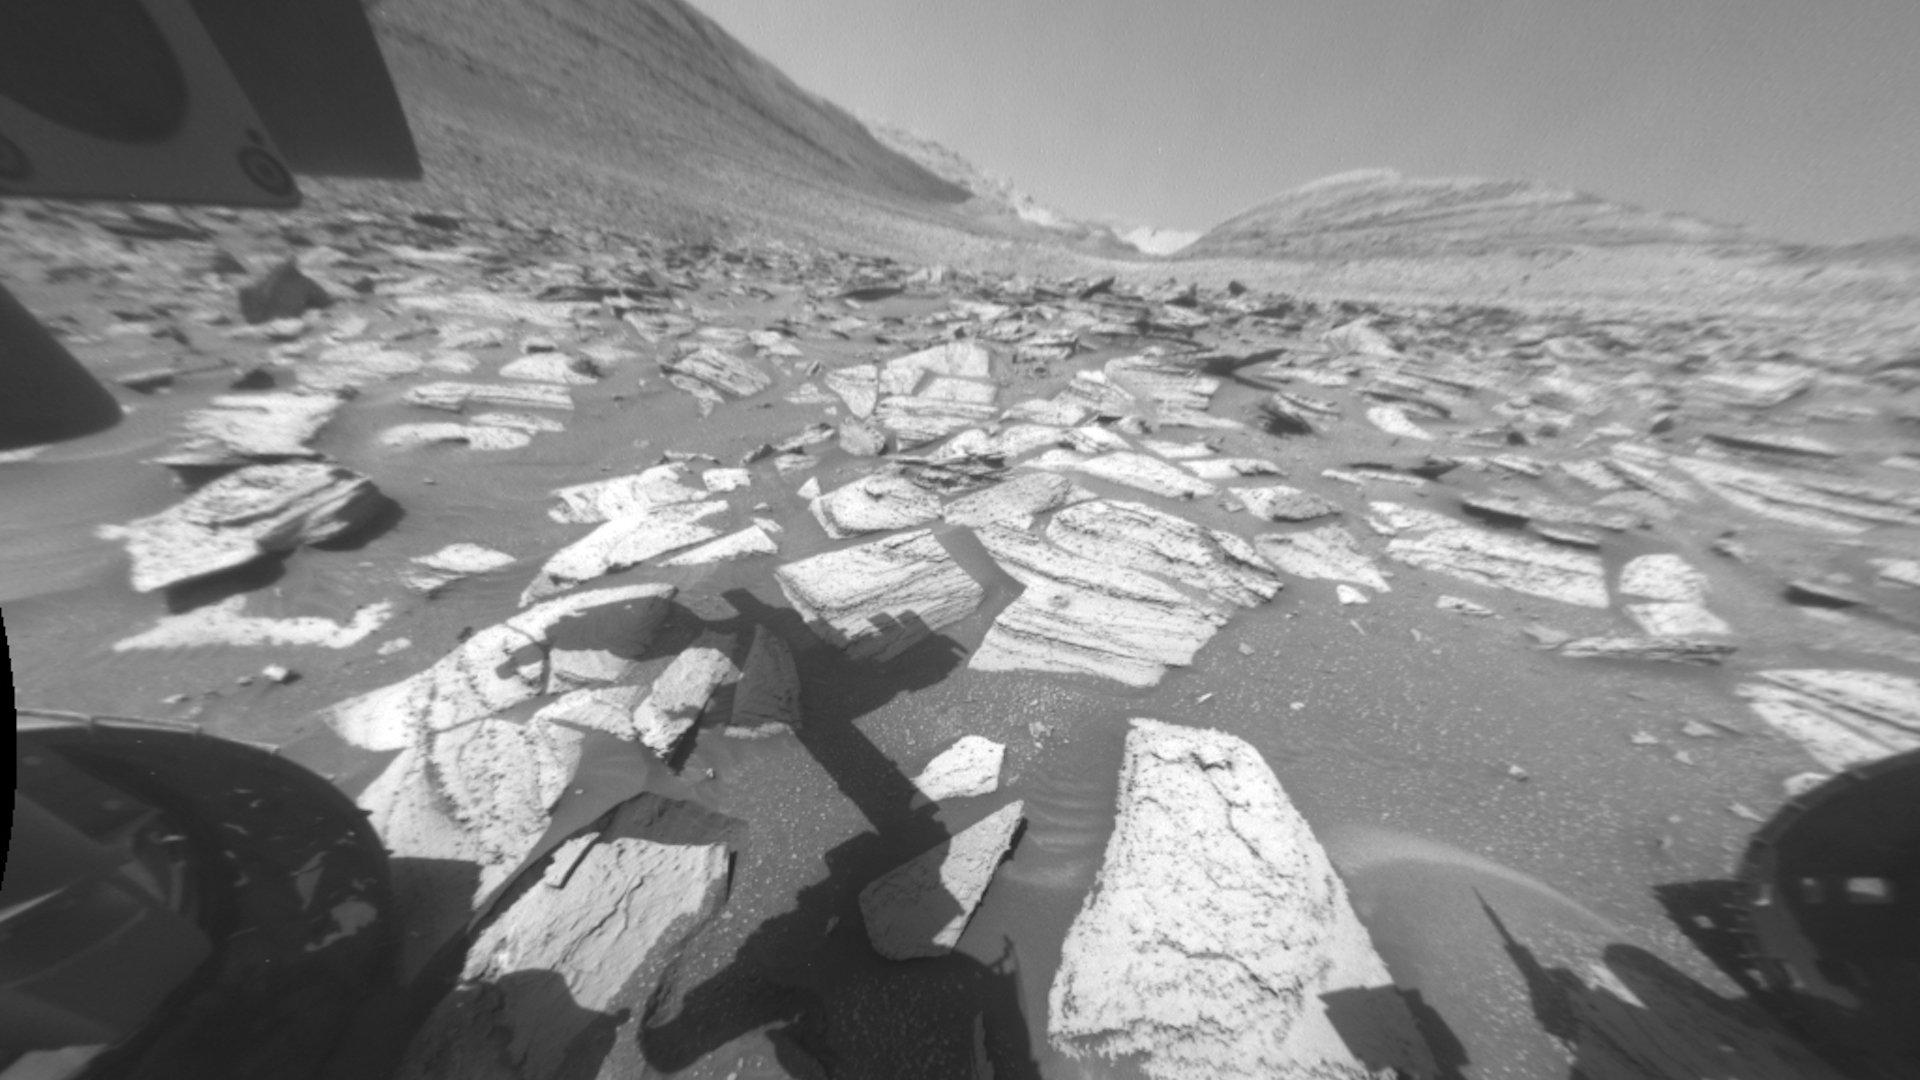 A Martian landscape taken by the Curiosity Rover, whose shadow is in the foreground.